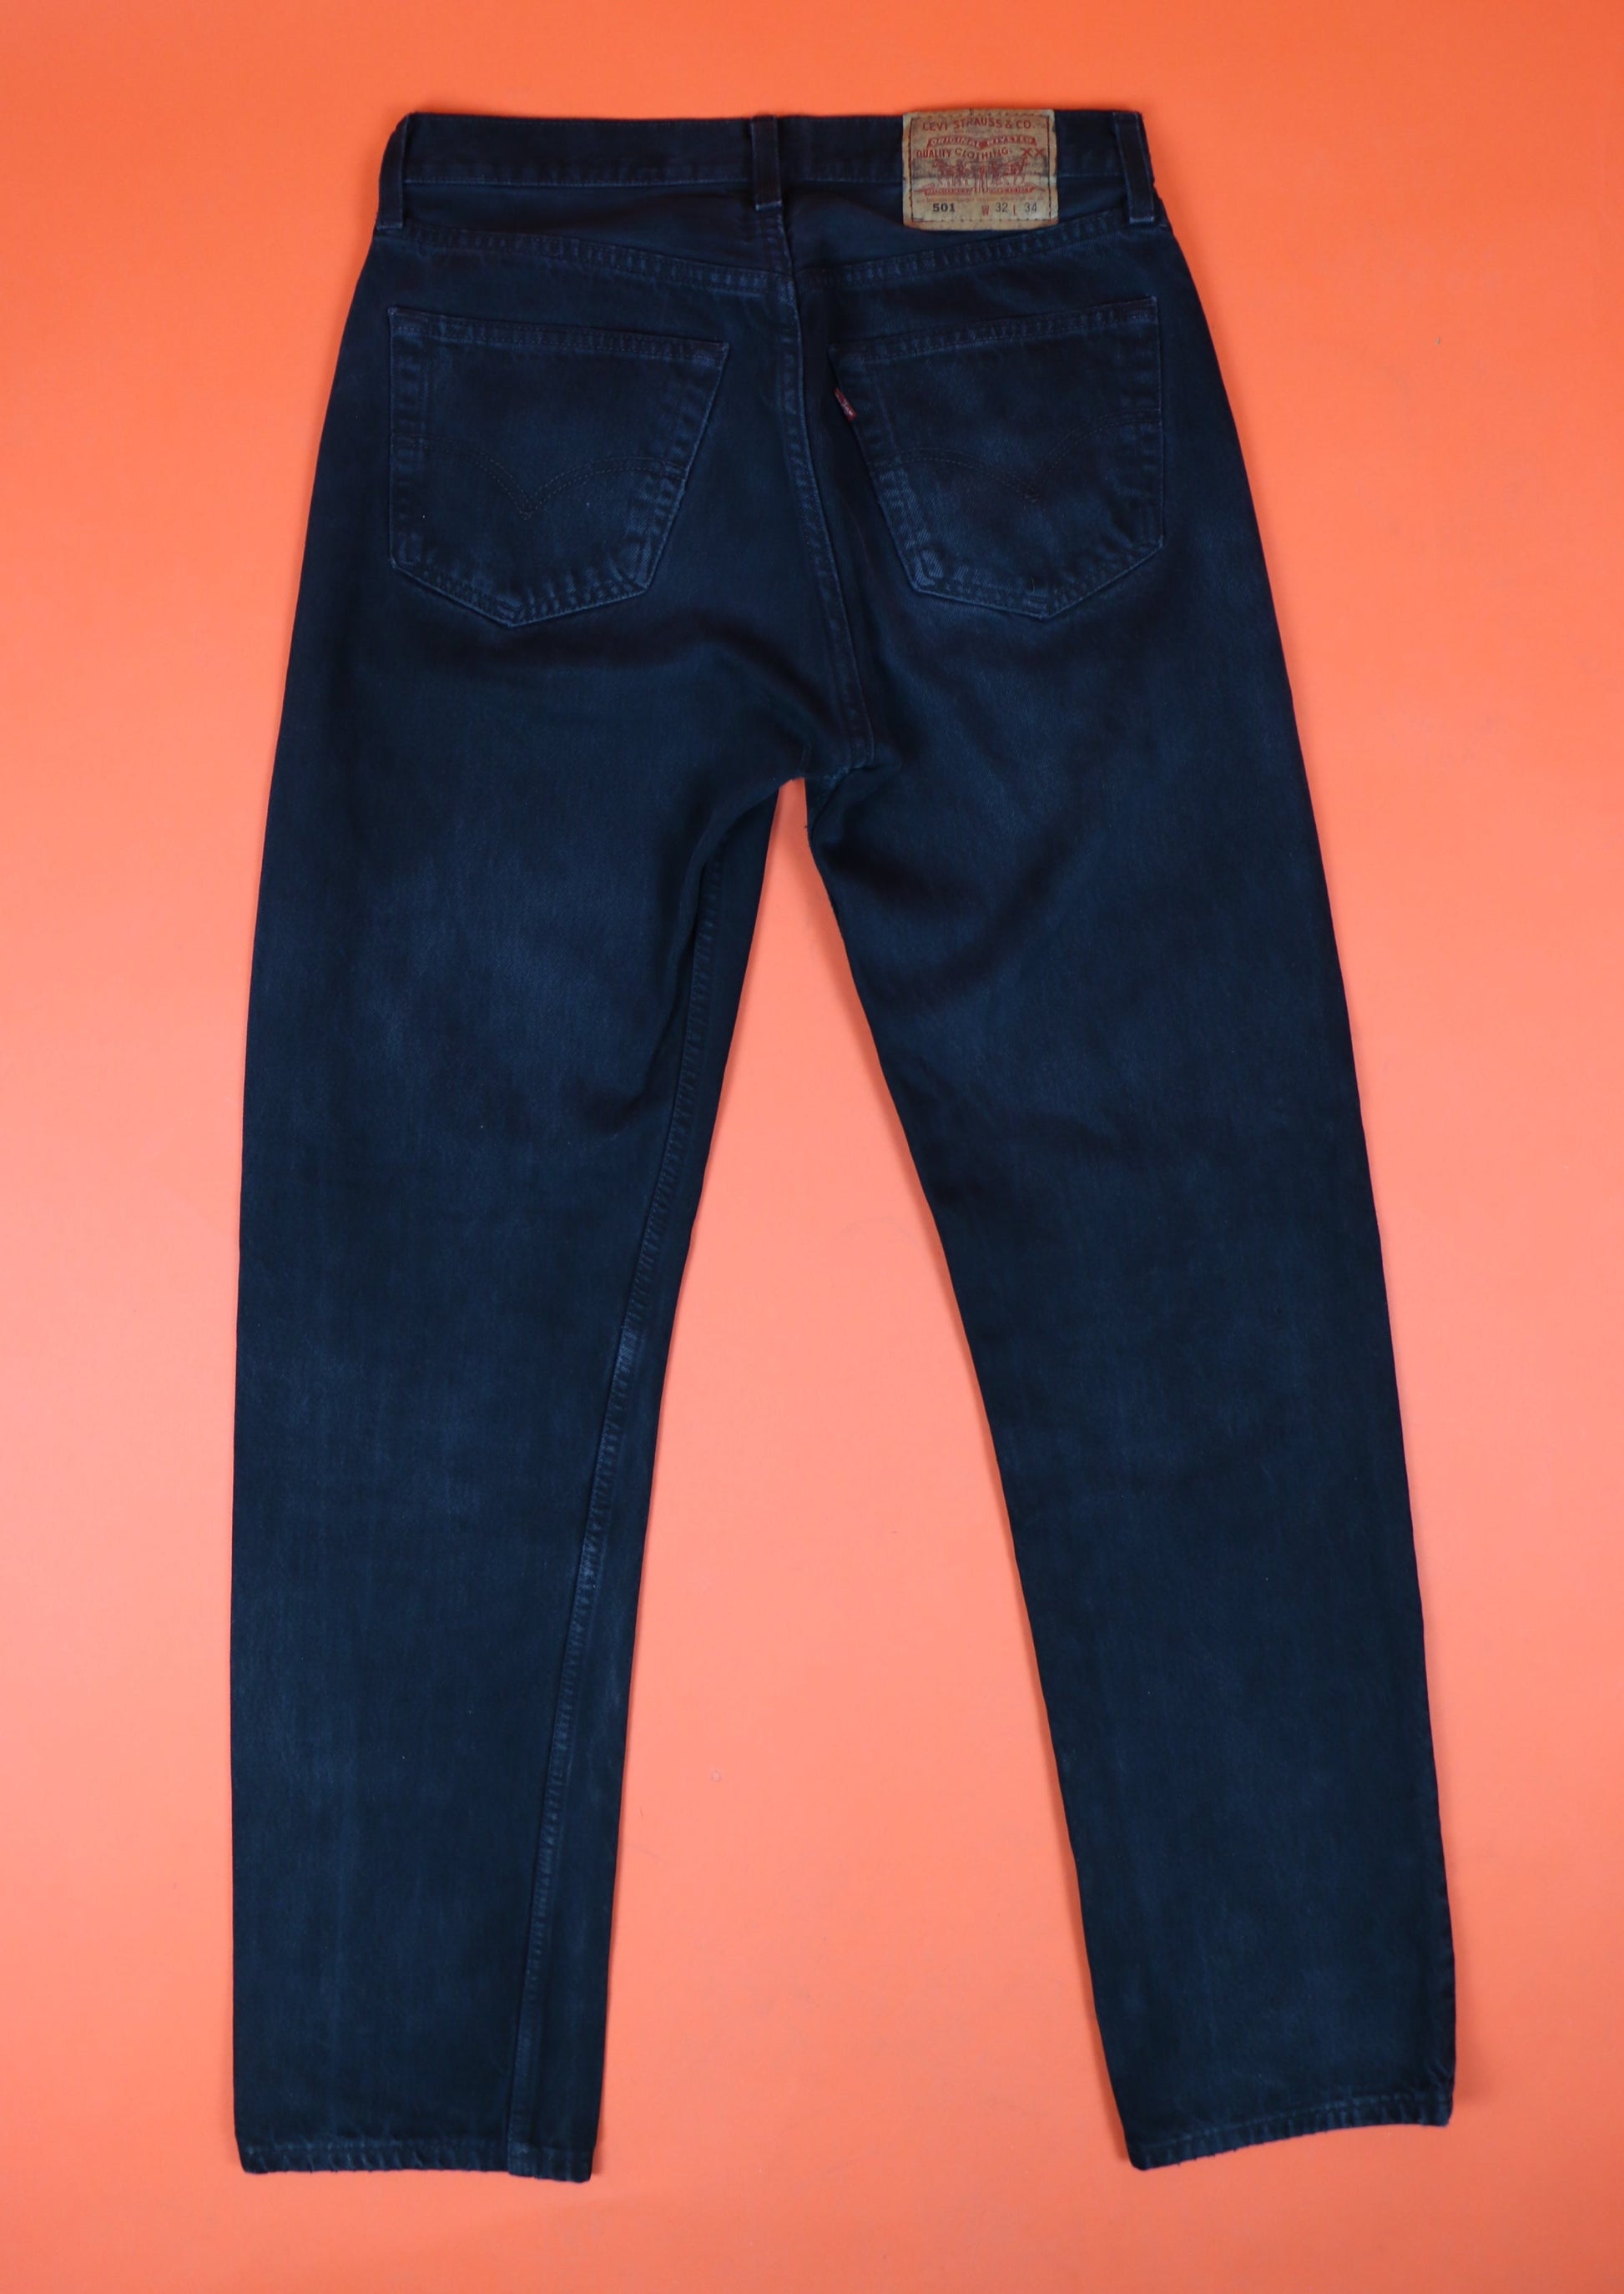 Levi's 501 Made in U.S.A. Jeans W32 L34 - vintage clothing clochard92.com